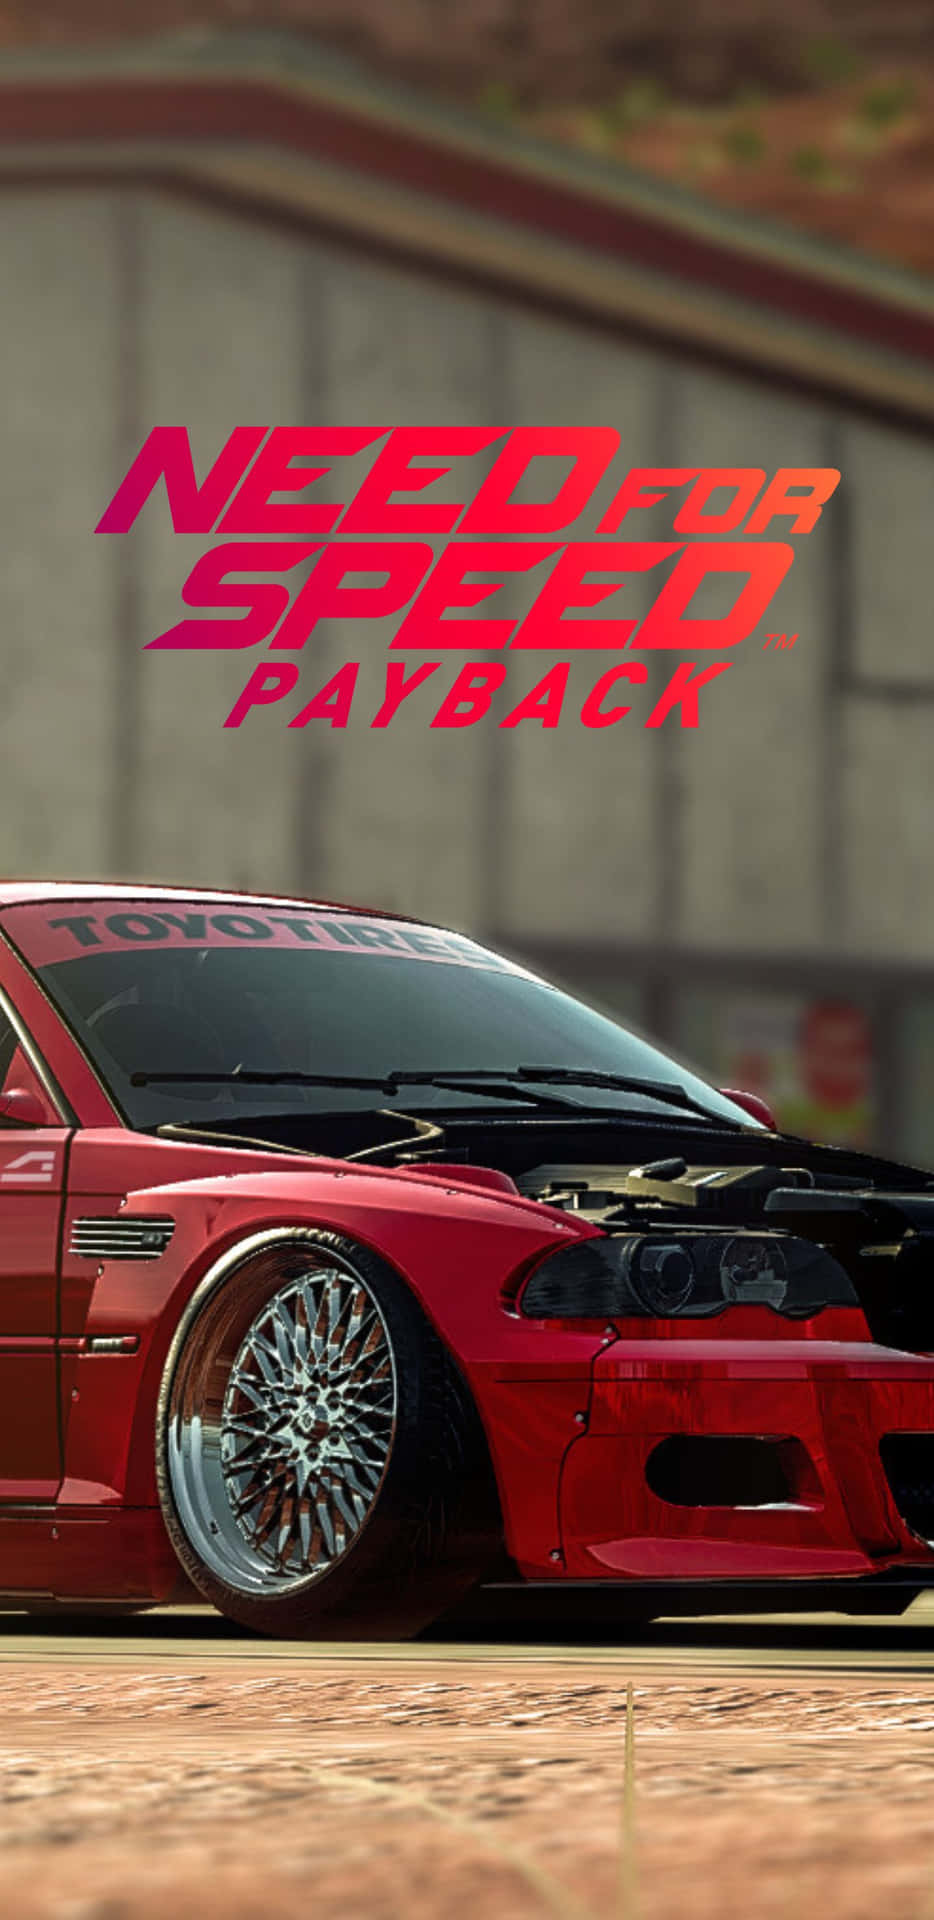 Apritila Strada In Need For Speed Payback Sul Tuo Pixel 3xl